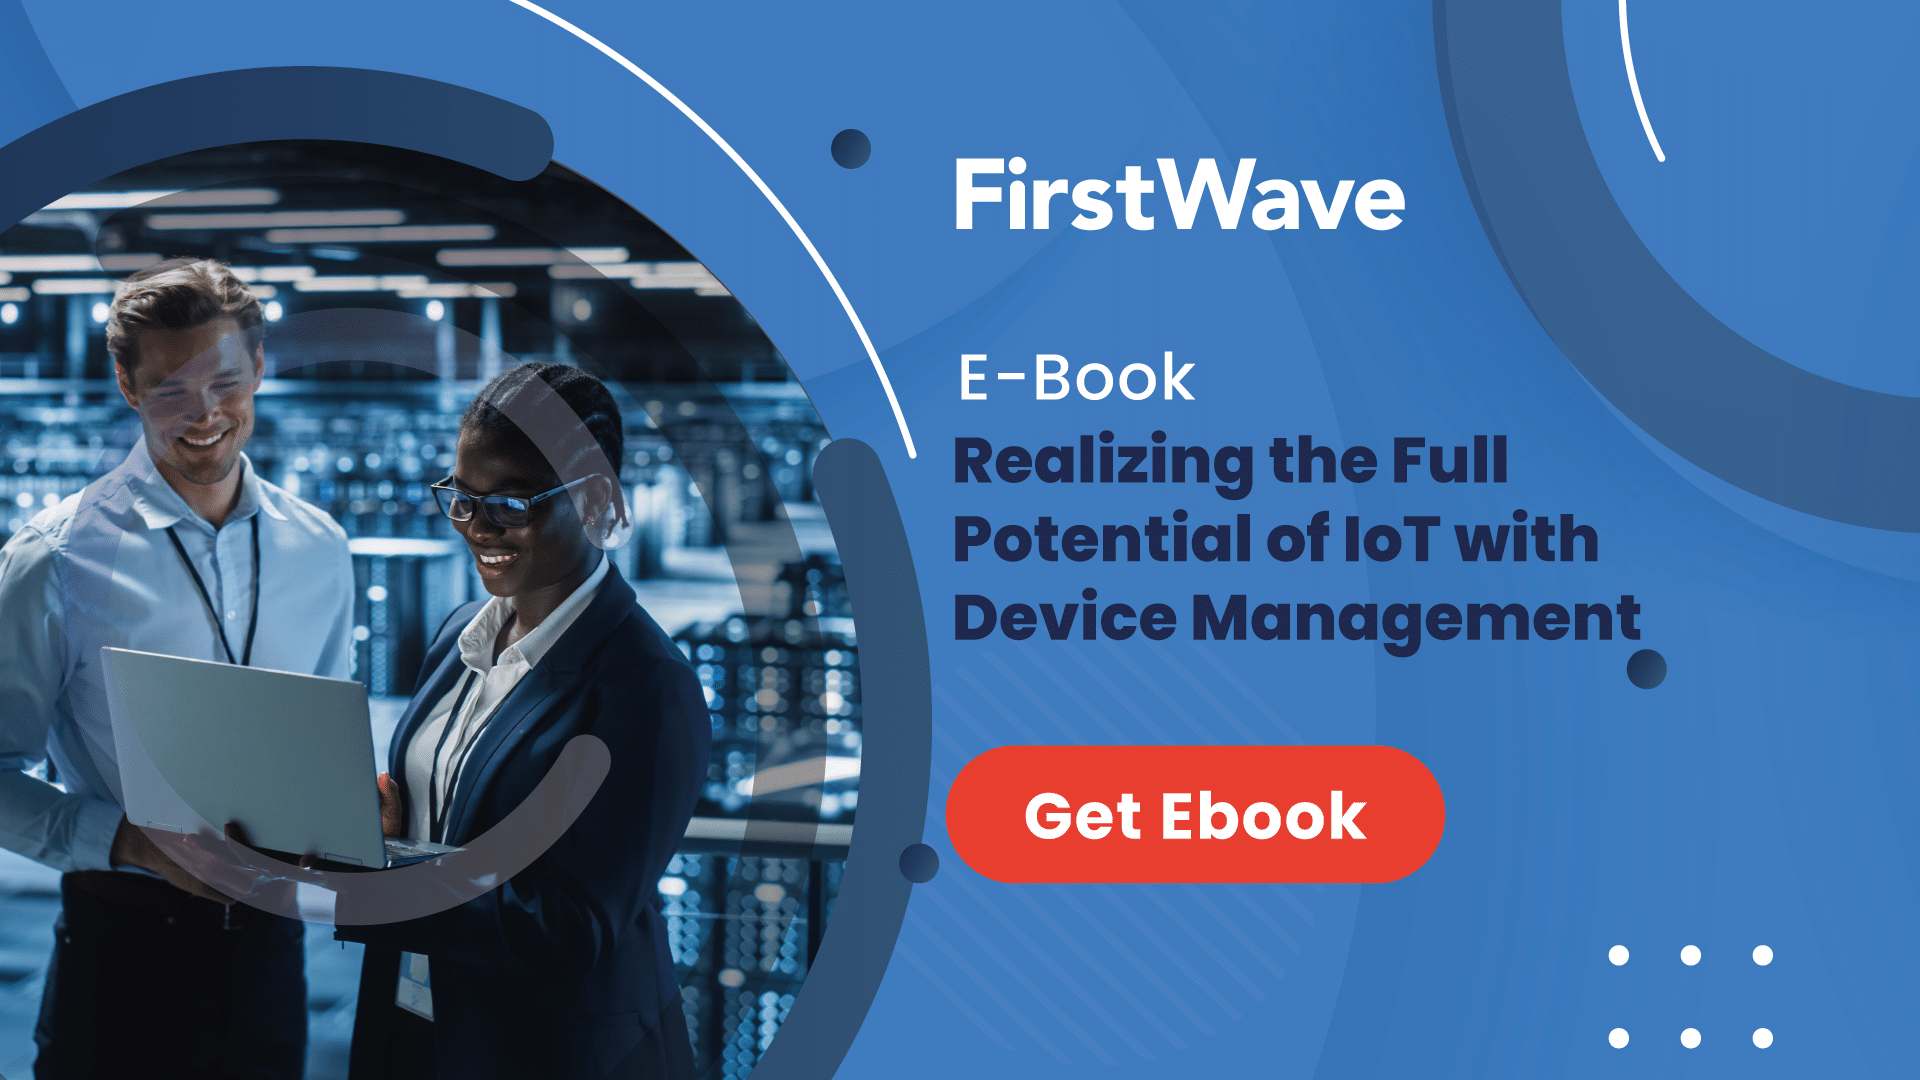 Realizing the Full Potential of IoT with Device Management